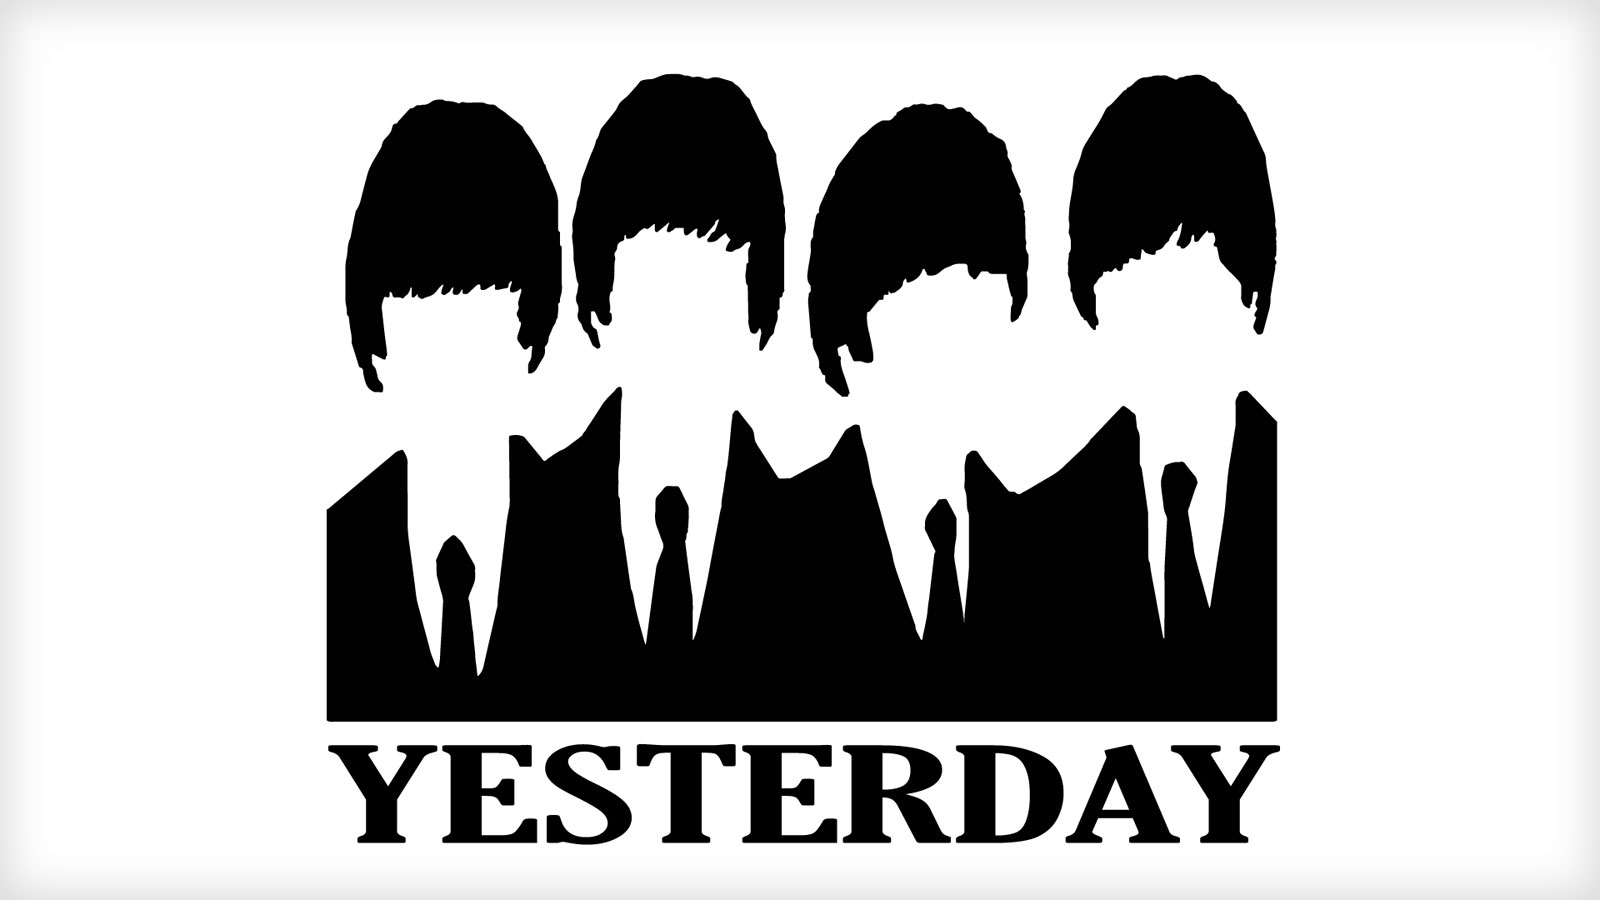 Composite of Yesterday text with silhouettes of The Beatles